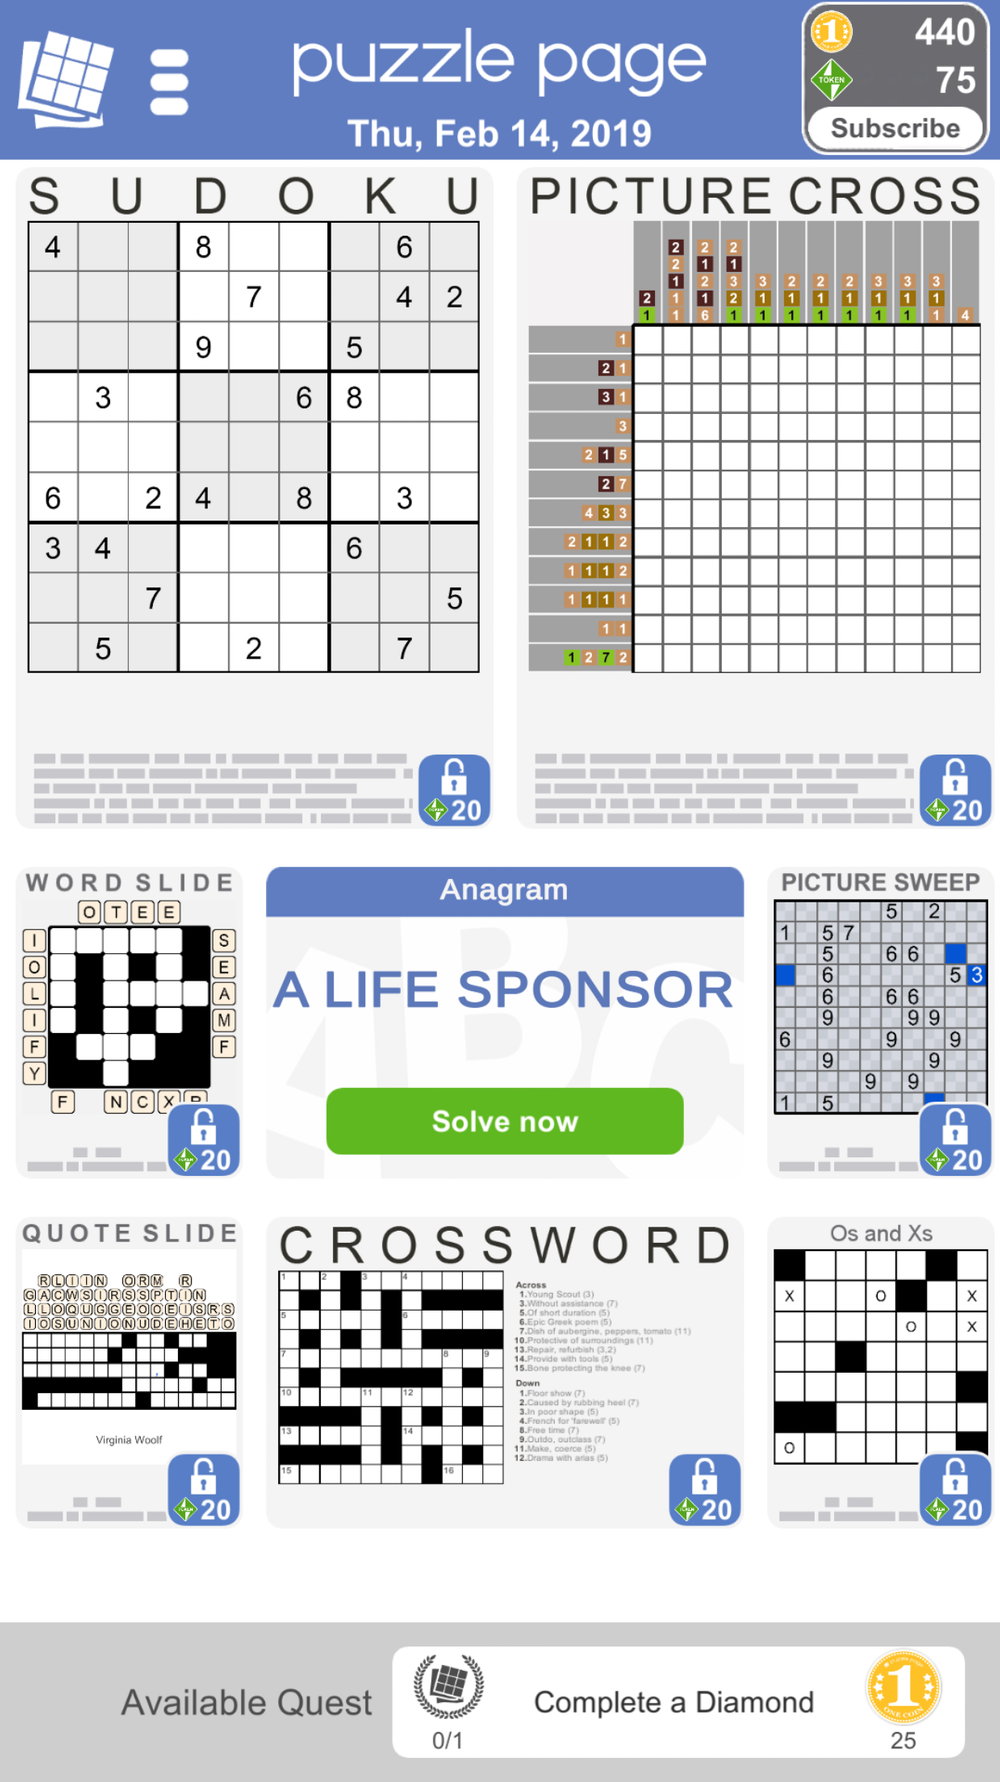 Free Online Games and Puzzles, puzzle, holiday